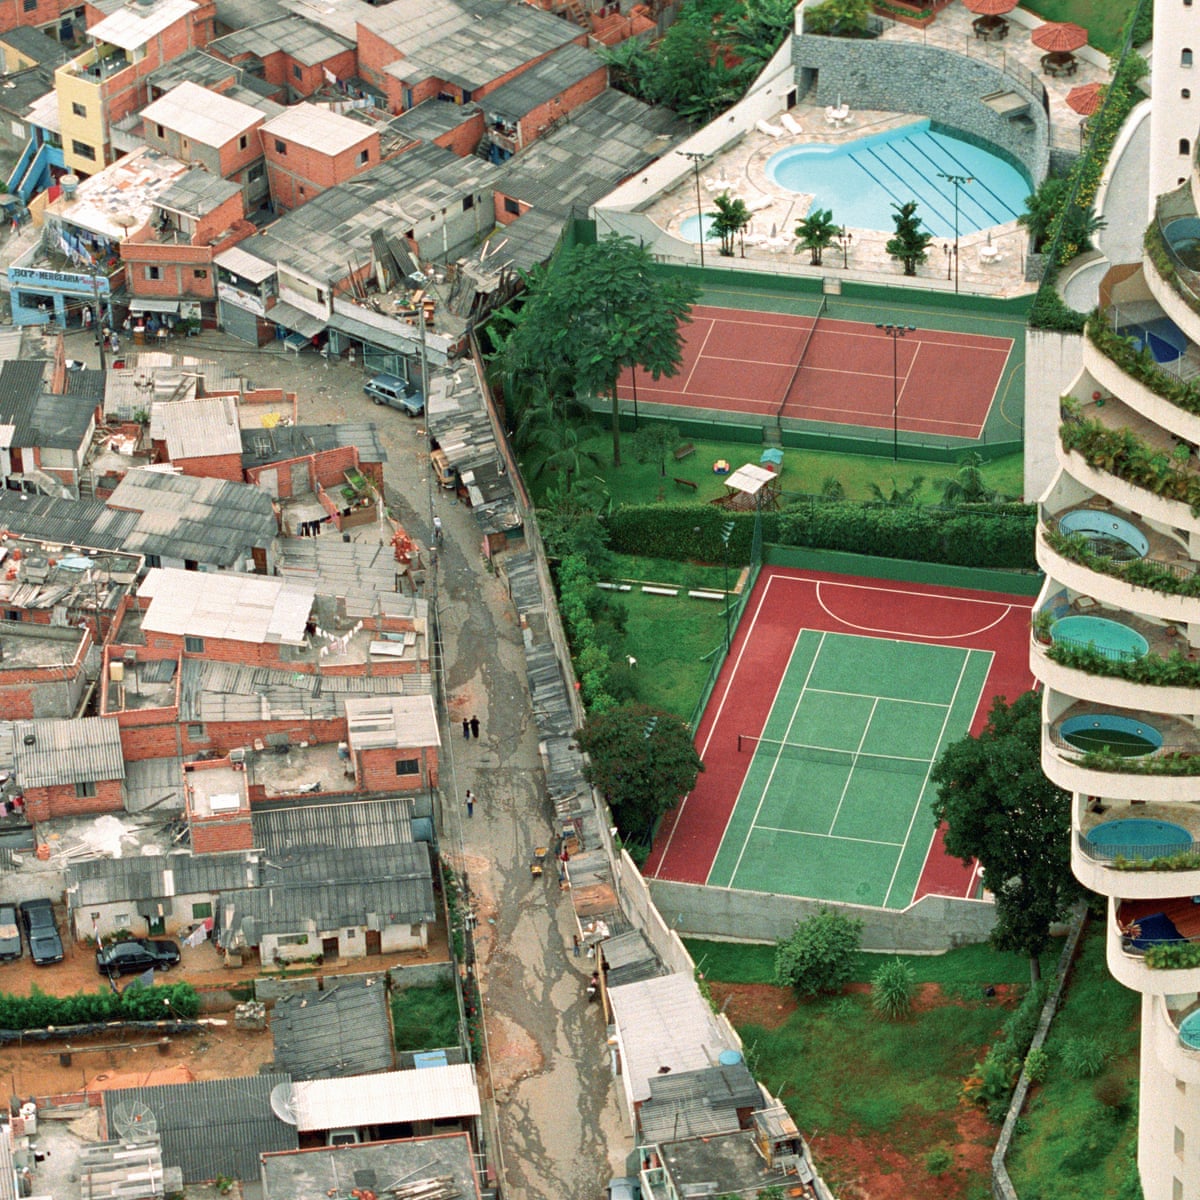 Inequality ... in a photograph | Cities | The Guardian